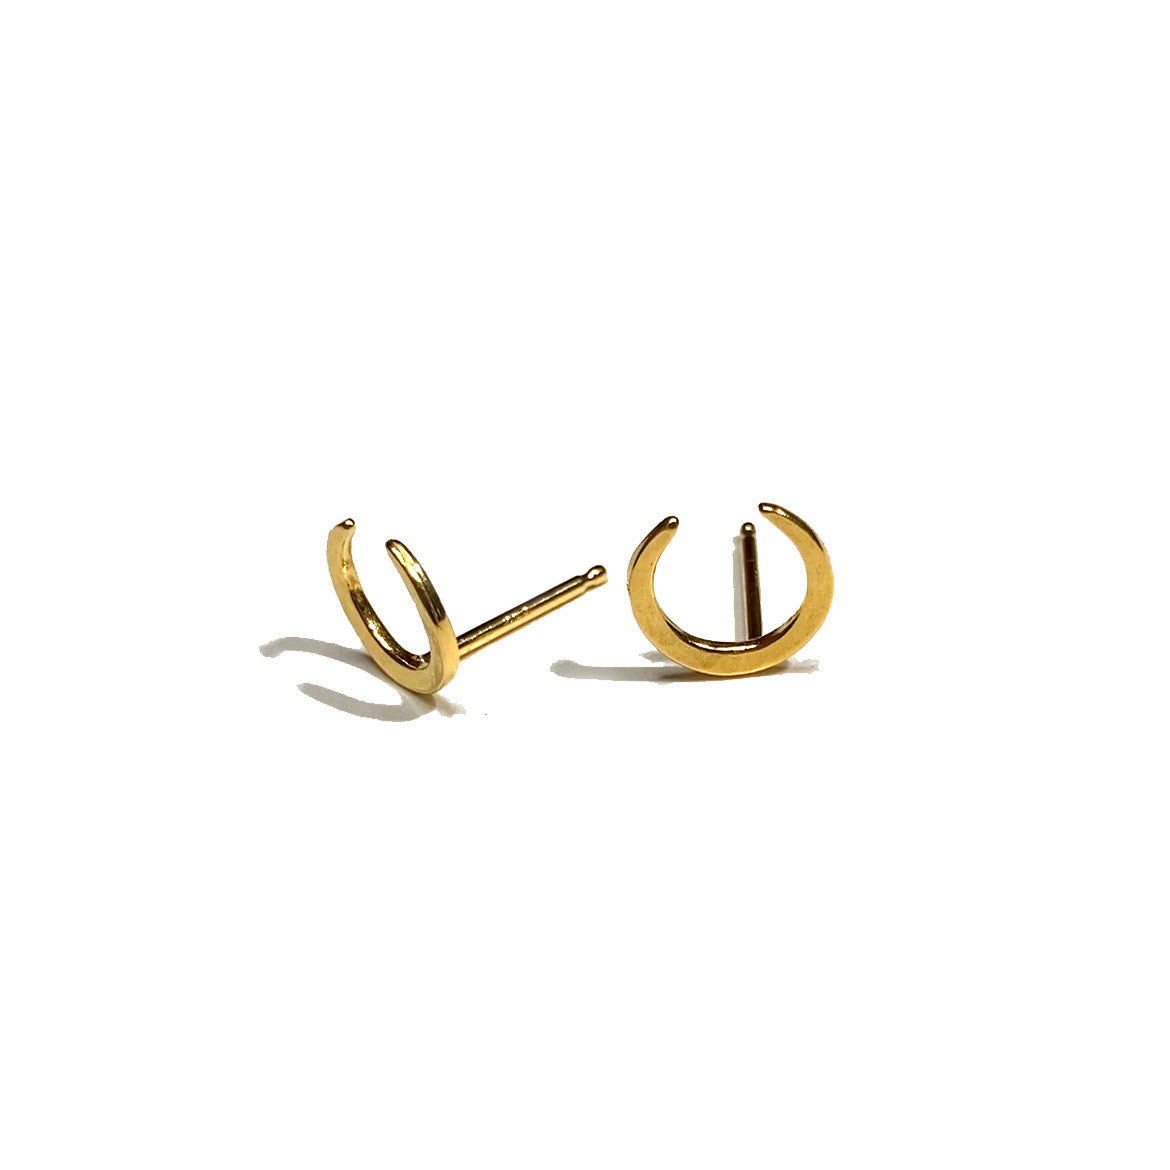 Crescent moon shaped hammered gold studs on the closed side on a white background